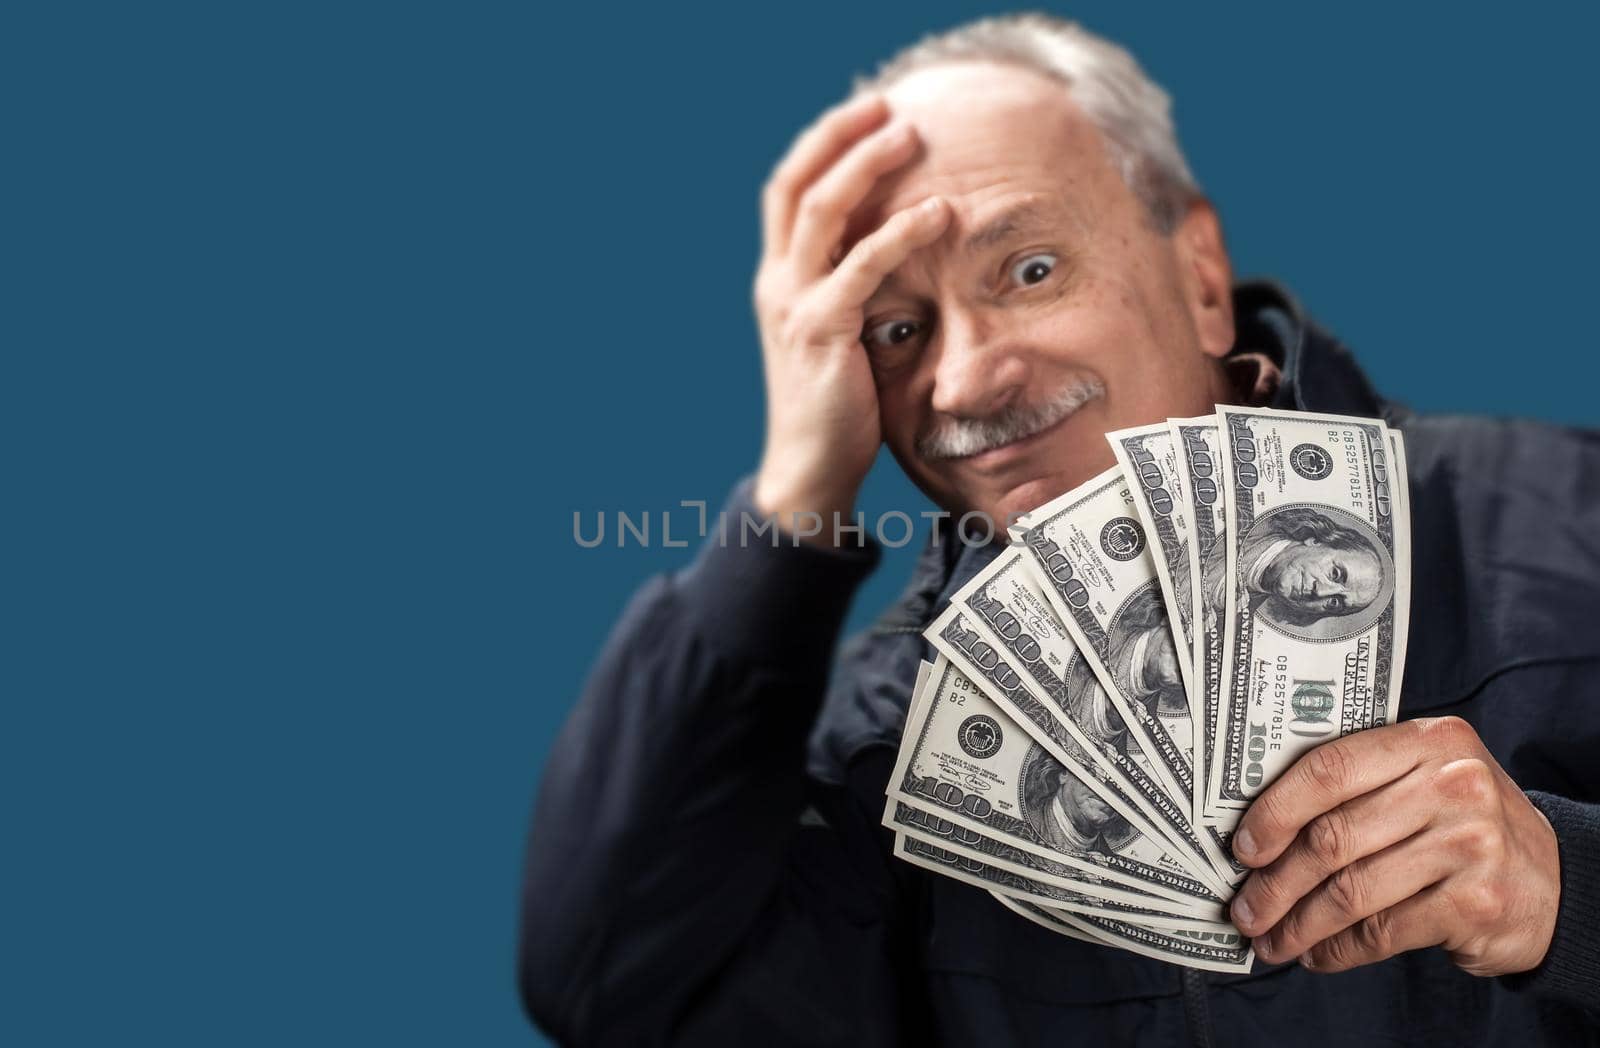 Lucky old man holding with pleasure group of dollar billson blue background with copy-space. Focus on money